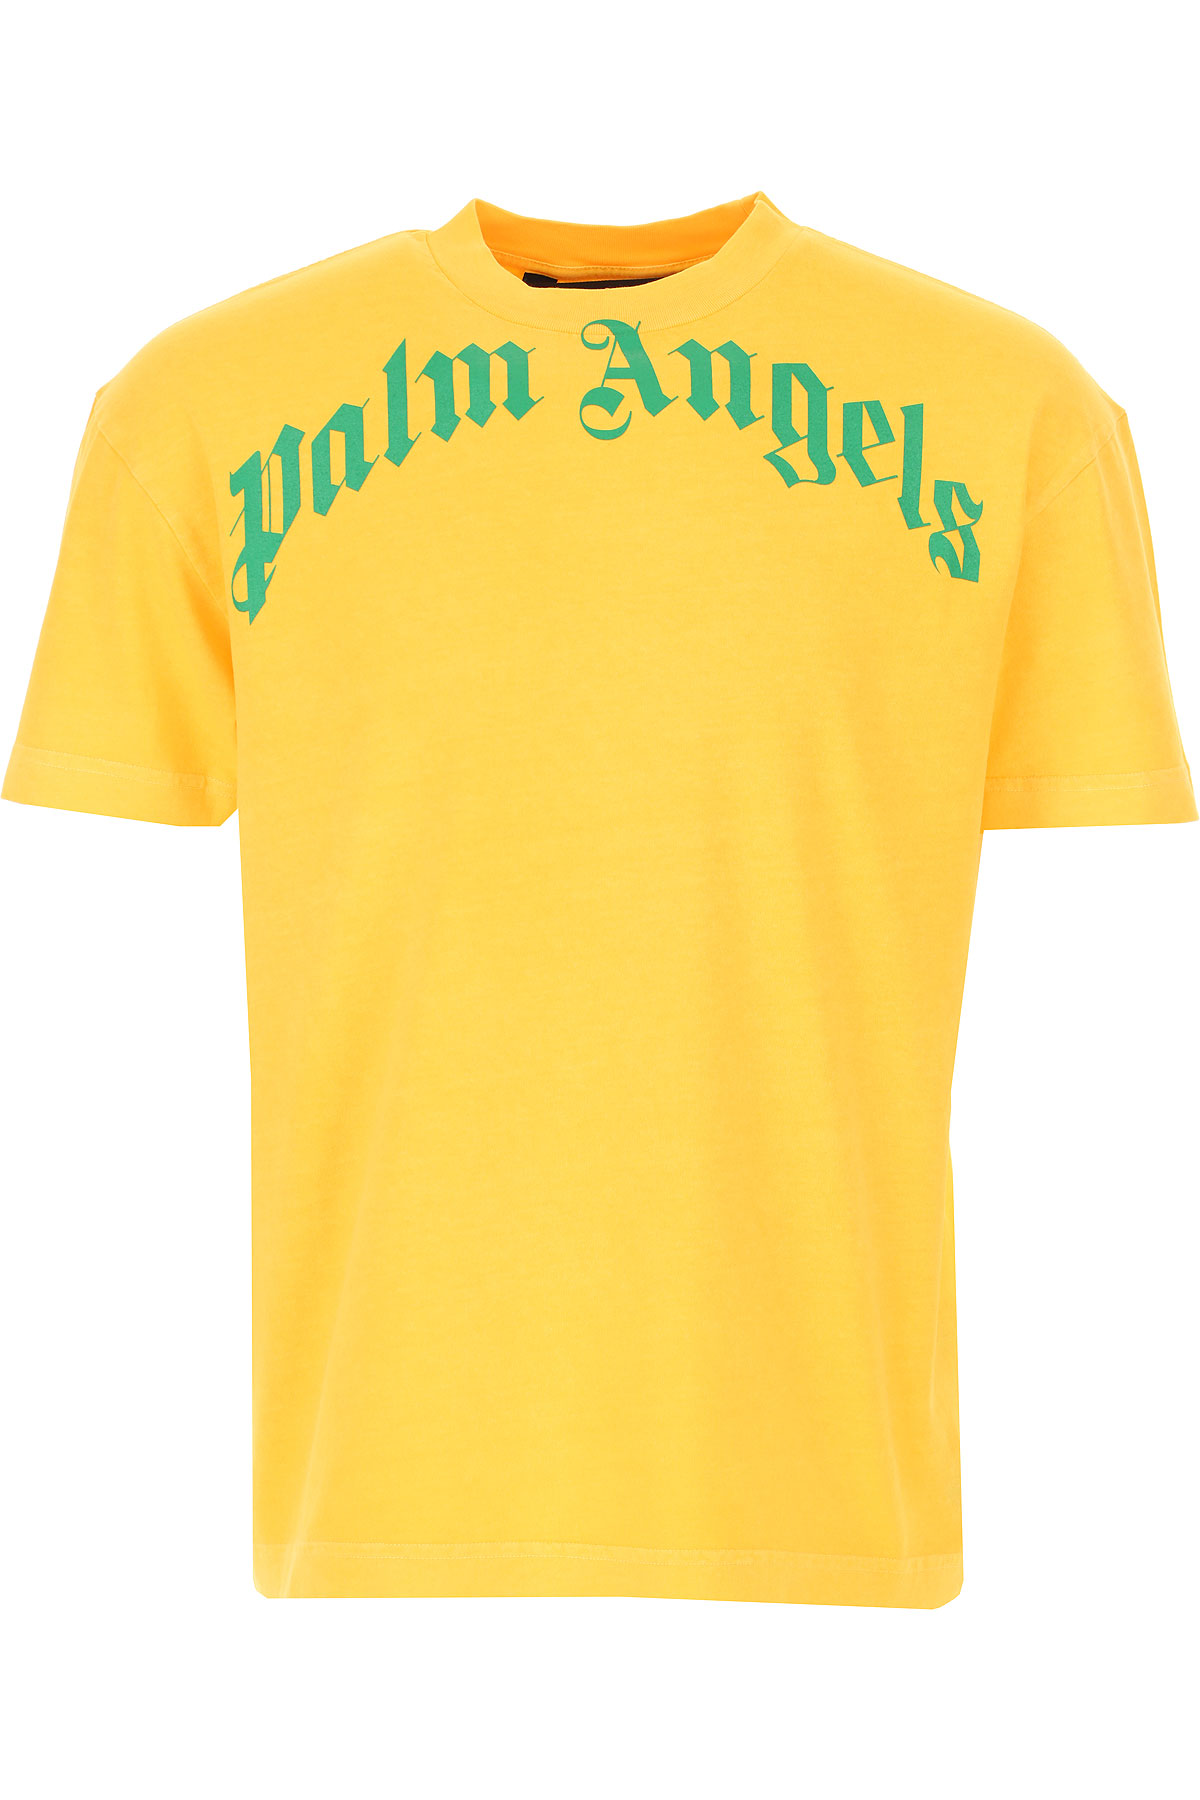 Mens Clothing Palm Angels, Style code: pmaa001r21jer0081855--